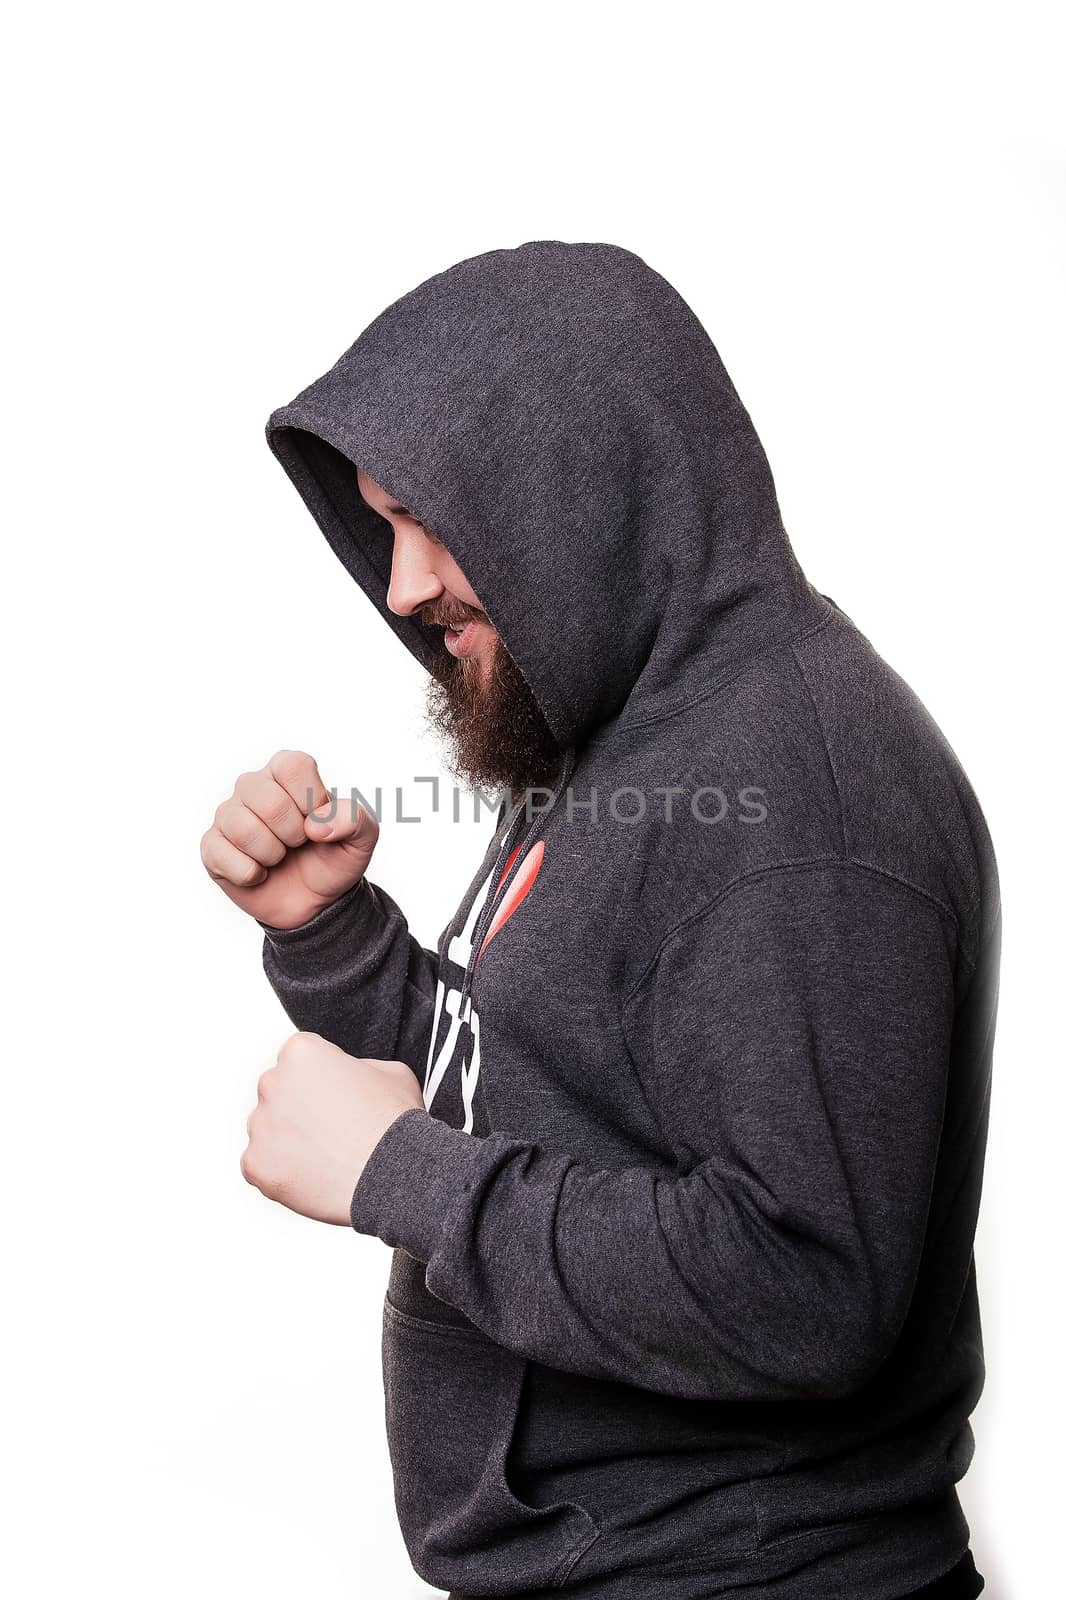 Boxer with a serious face with a beard in the hood in training. Isolated on white background